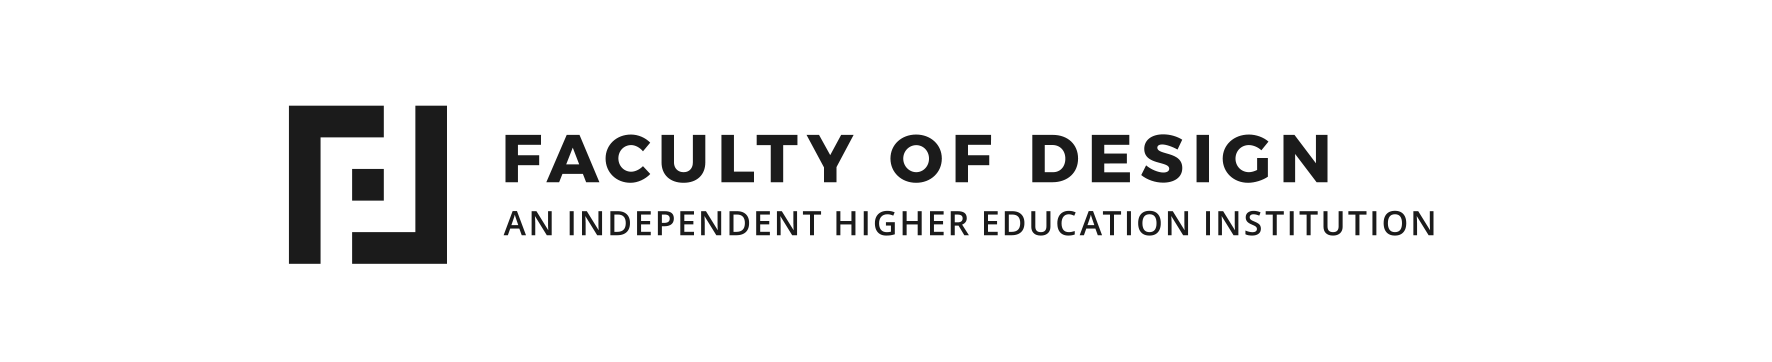 FACULTY OF DESIGN, Independent Higher Education Institution Logo